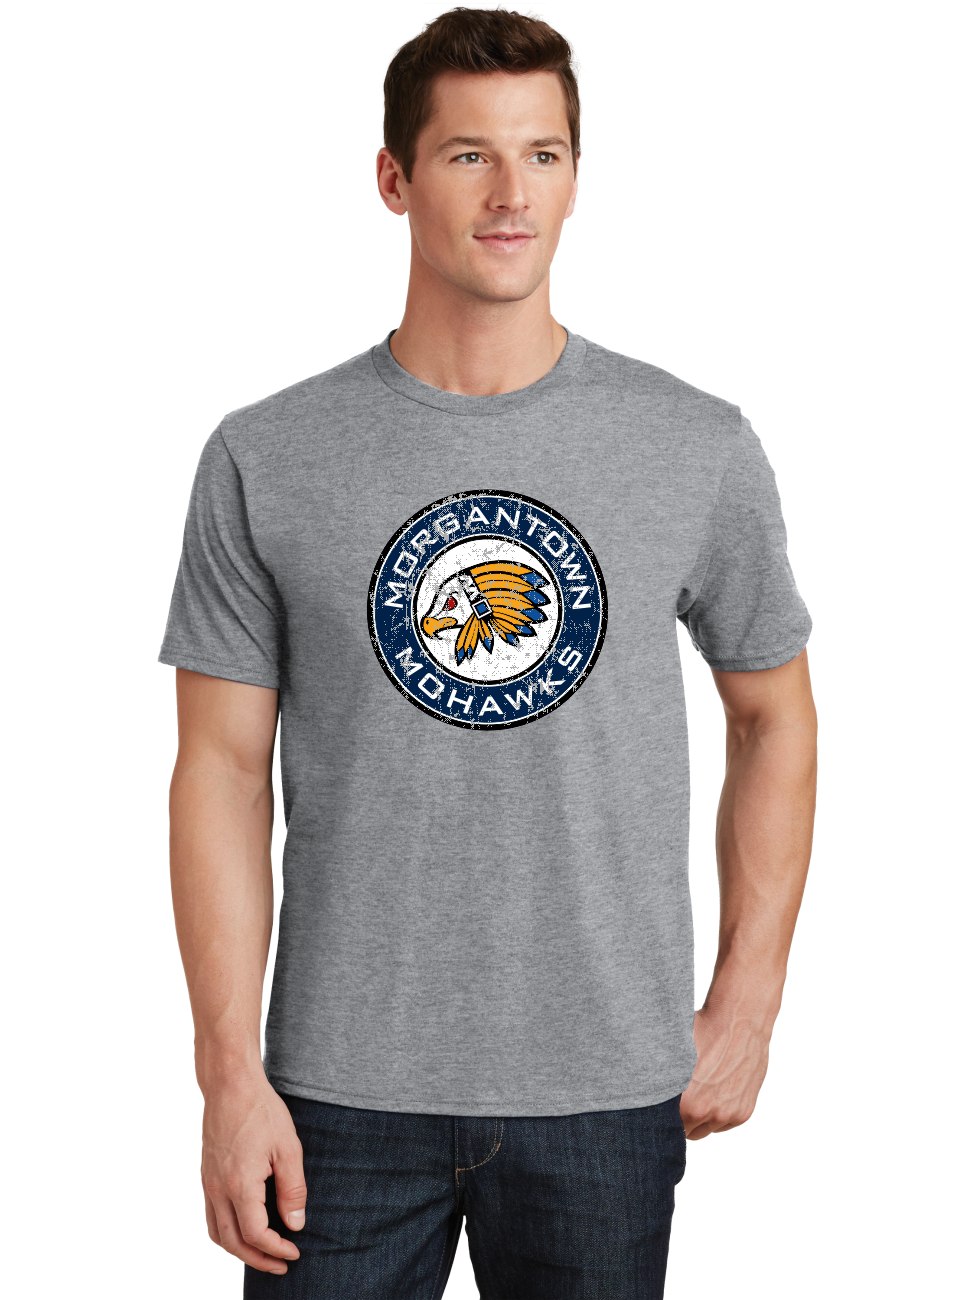 Distressed Logo T-Shirt - Morgantown Mohawks - Multiple Colors Available